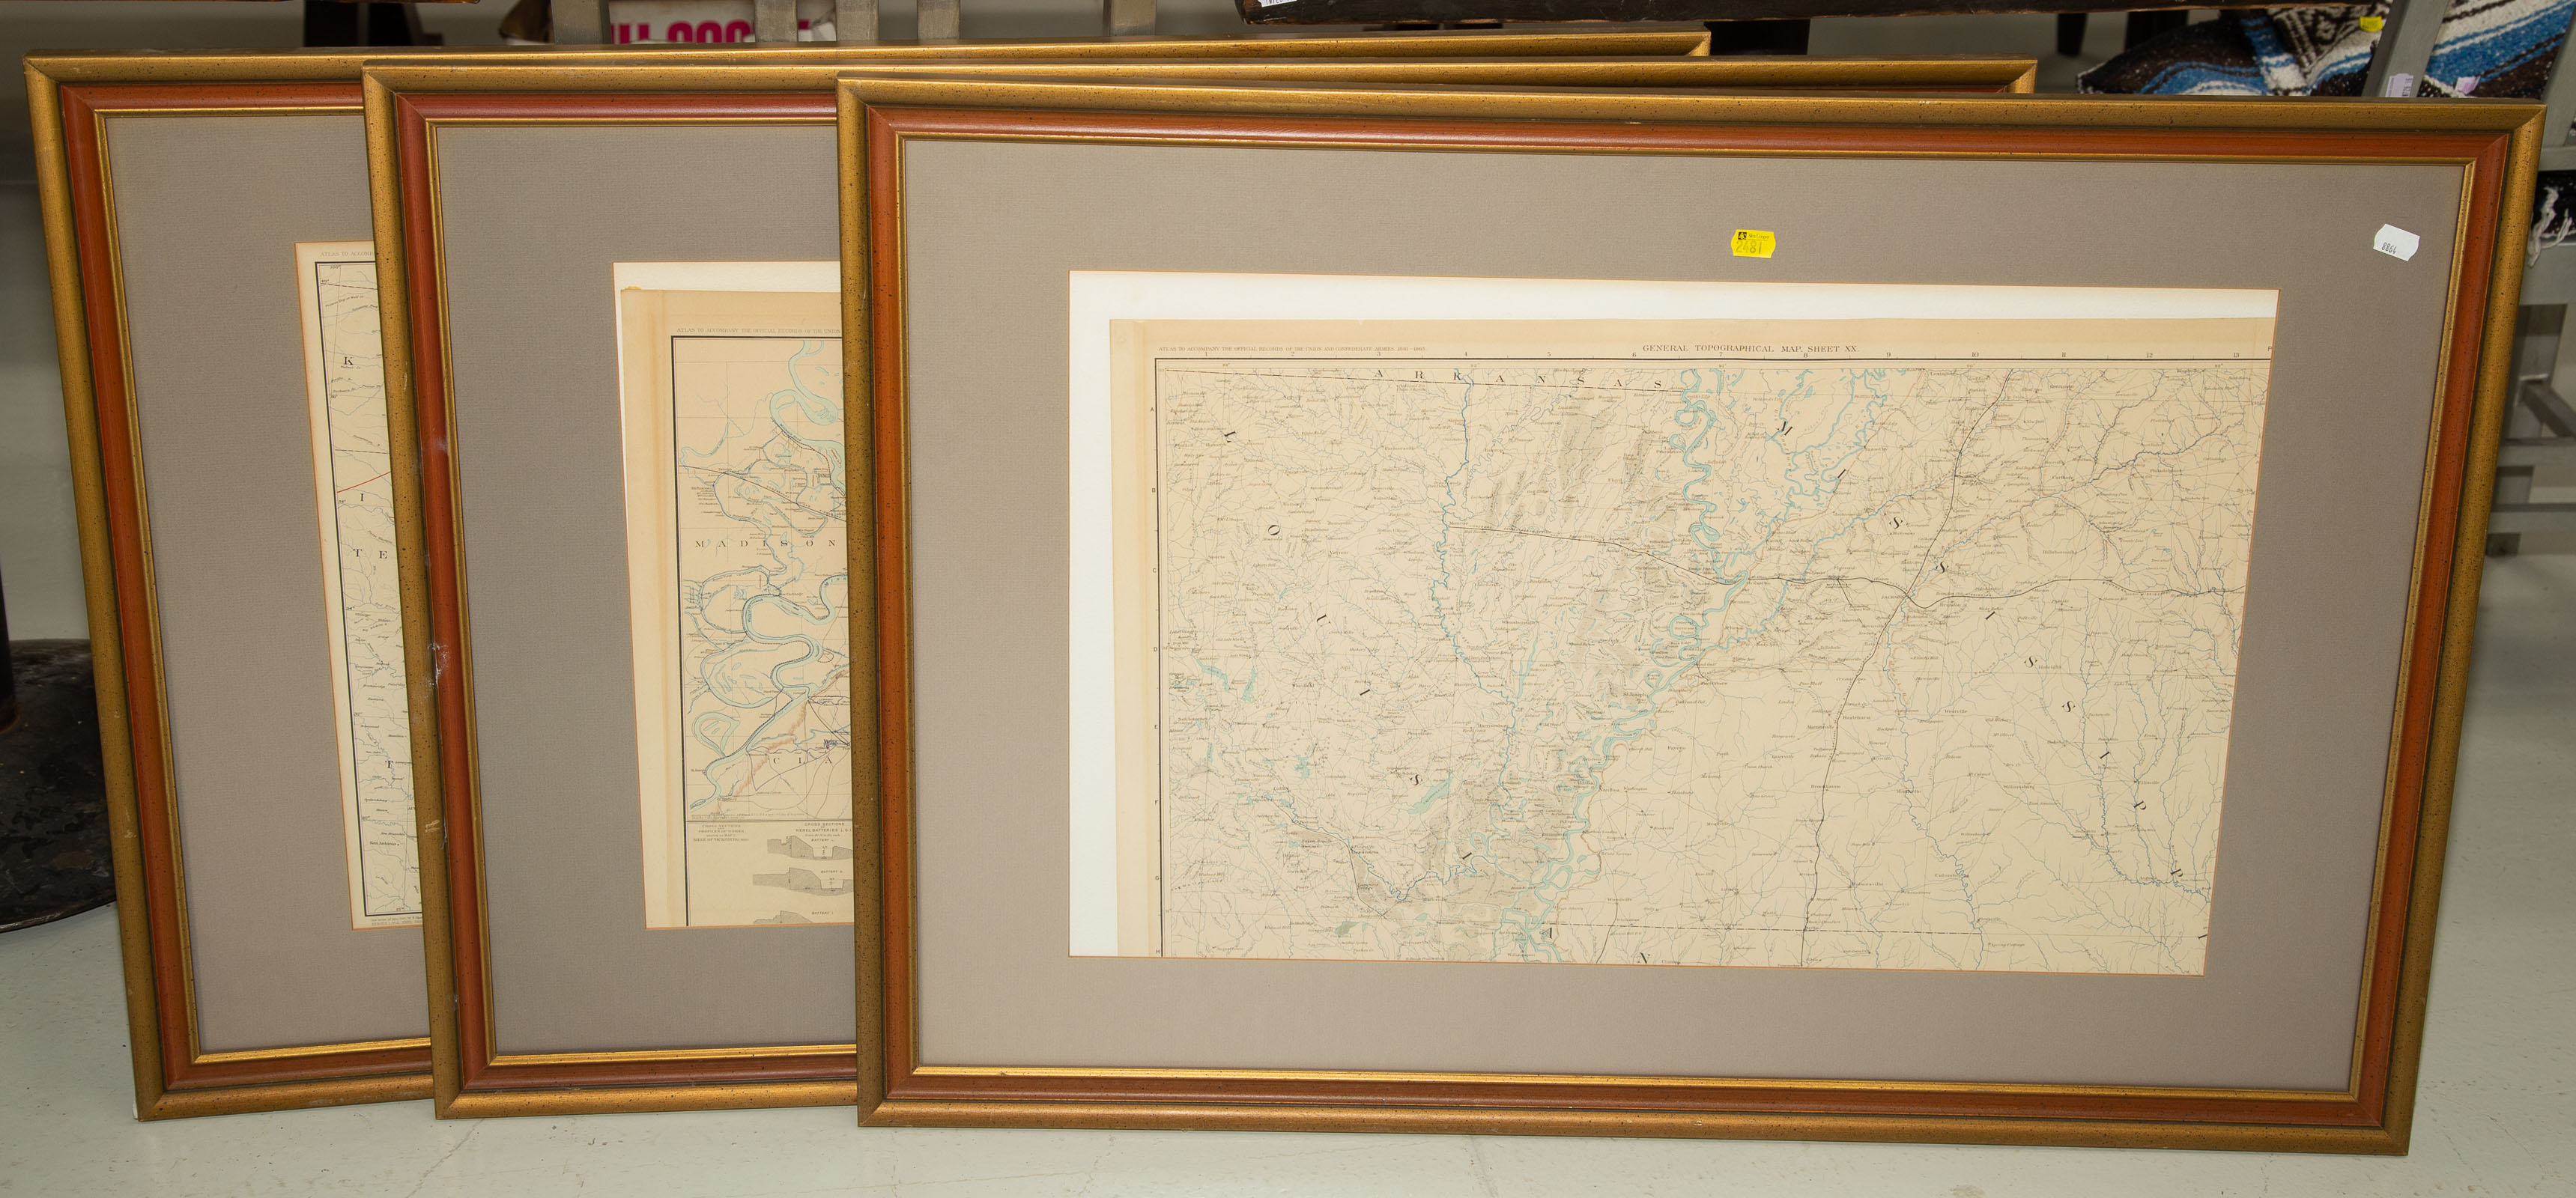 THREE FRAMED MAPS Includes showing